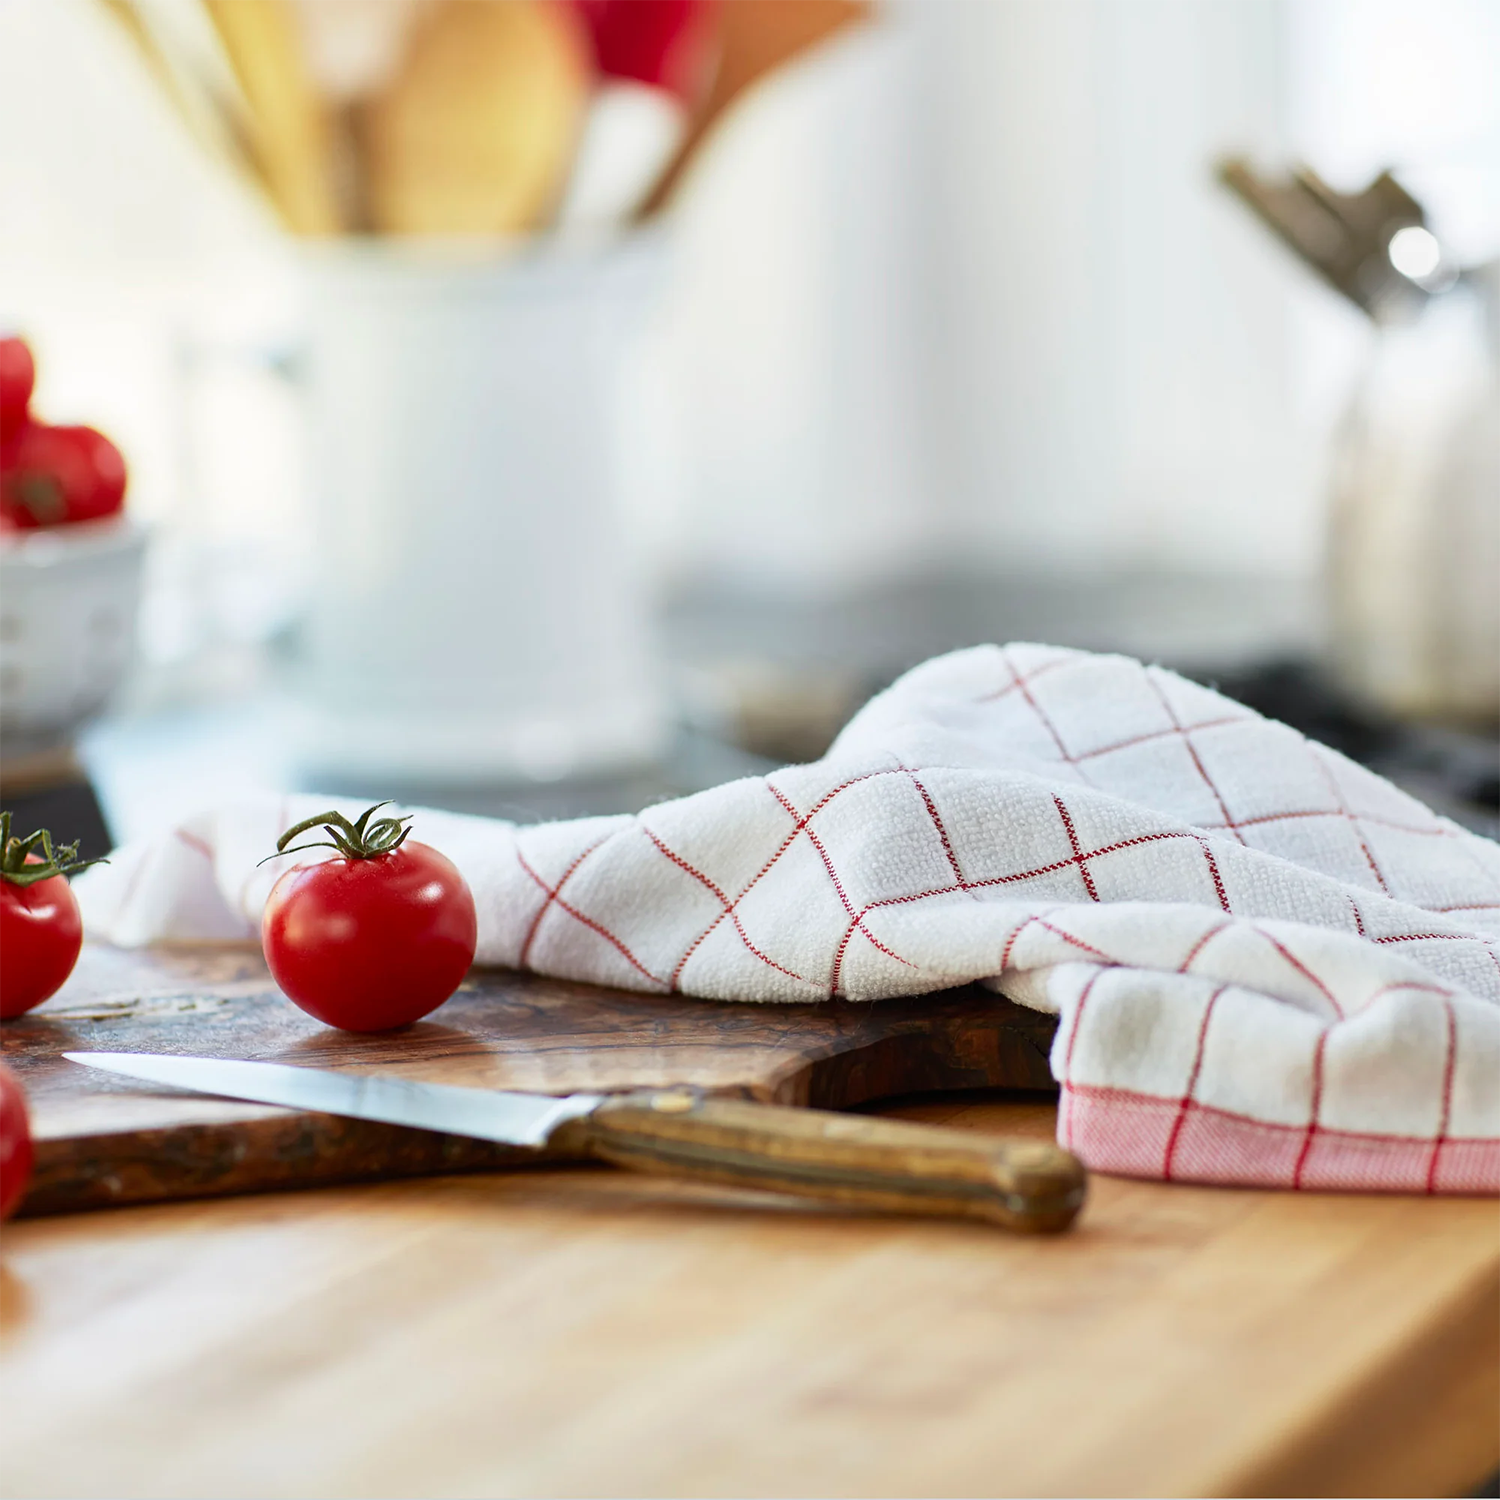 Classic Eco Tea Towel For Drying Glass & Cookware